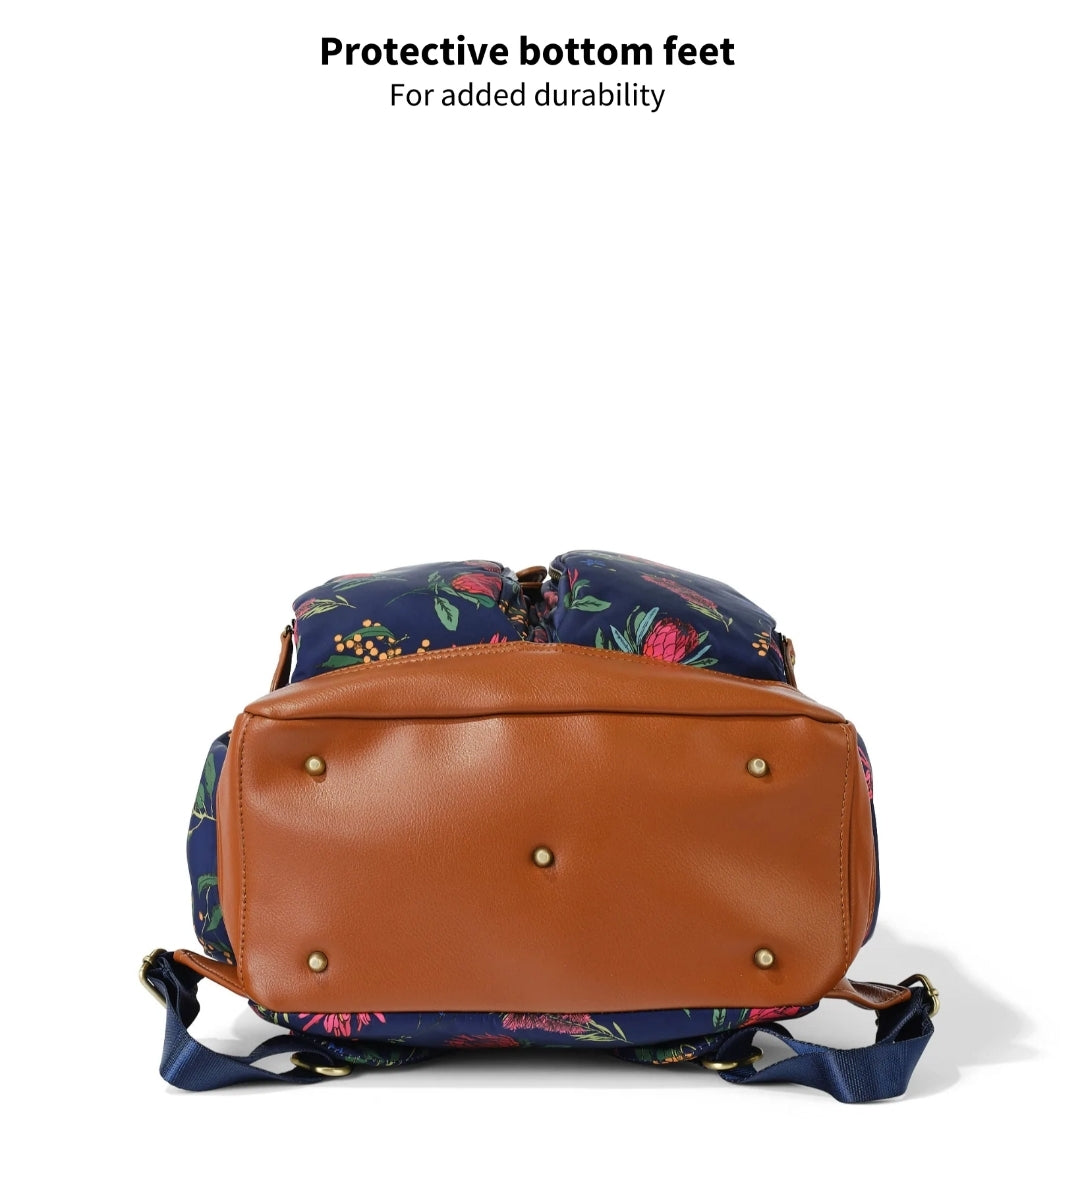 OiOi Back Pack - Floral Botanical